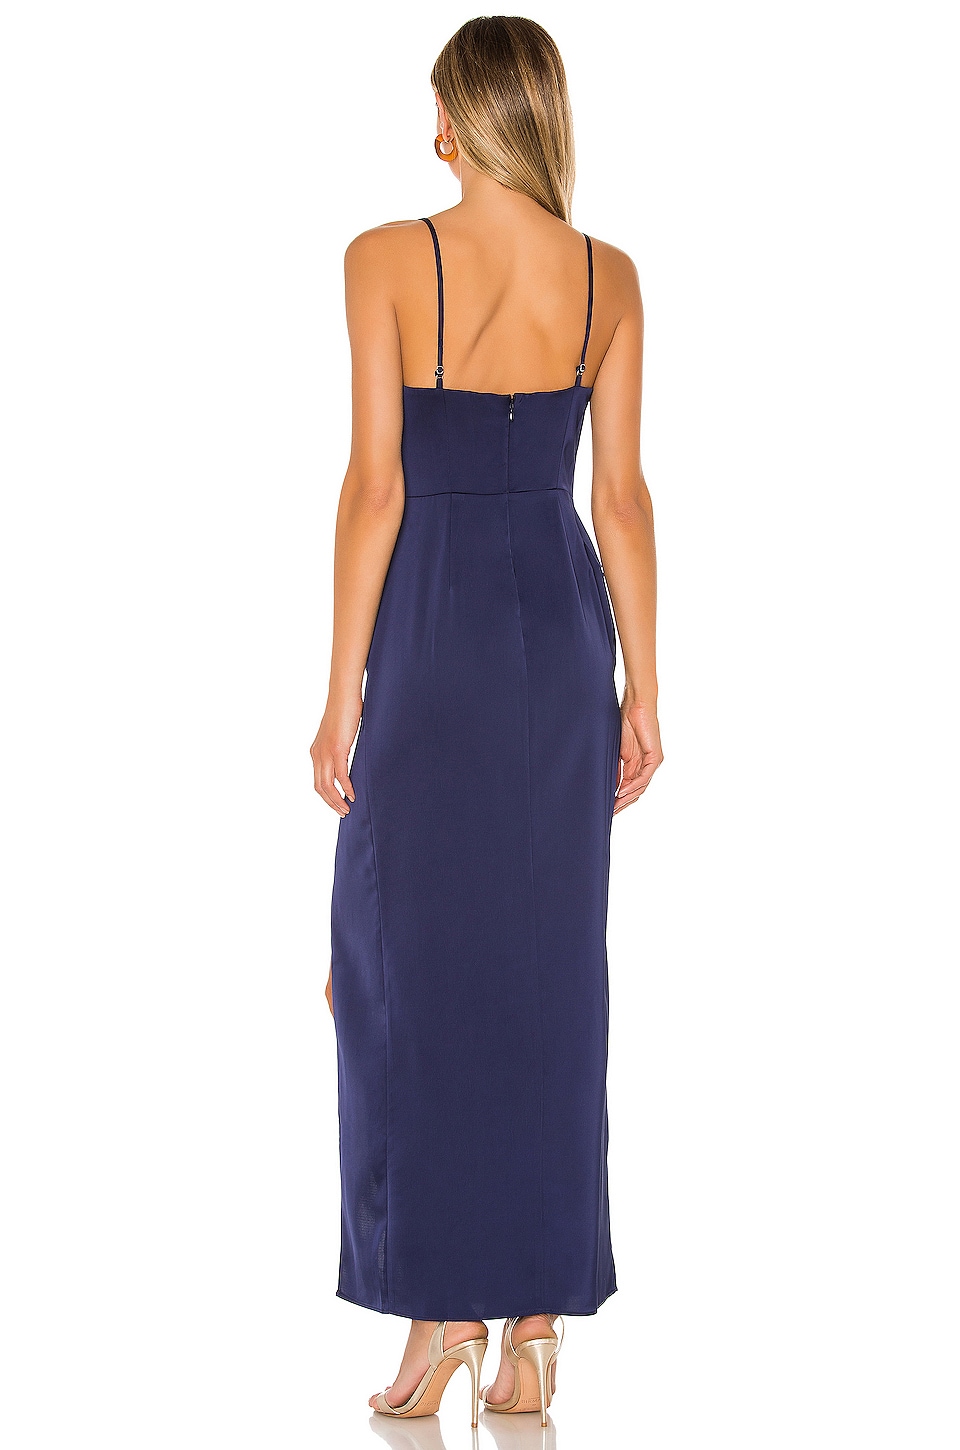 NBD Lila Gown in Blueberry | REVOLVE